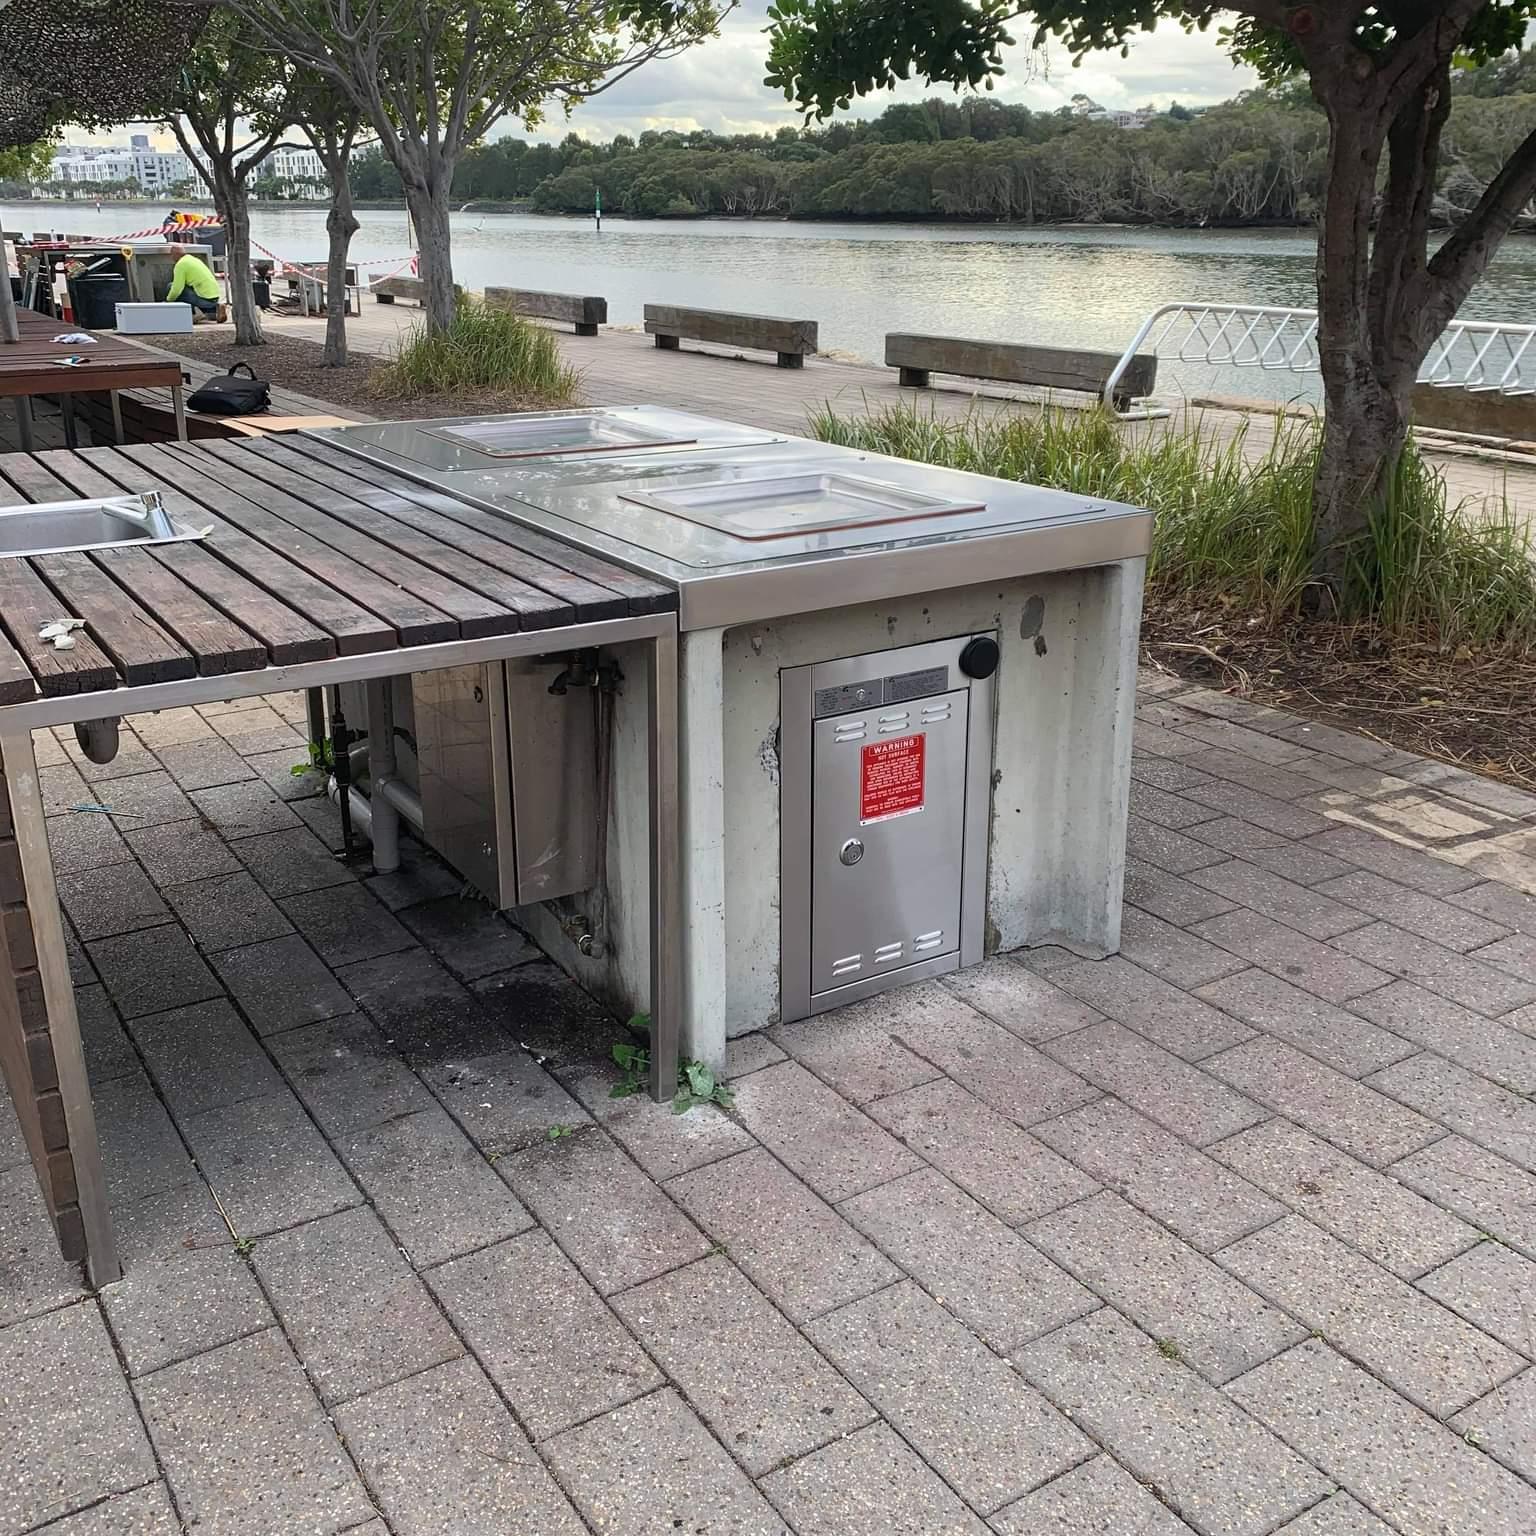 Sydney Olympic Park Adopt Greenplate’s Smart BBQ Management System Technology